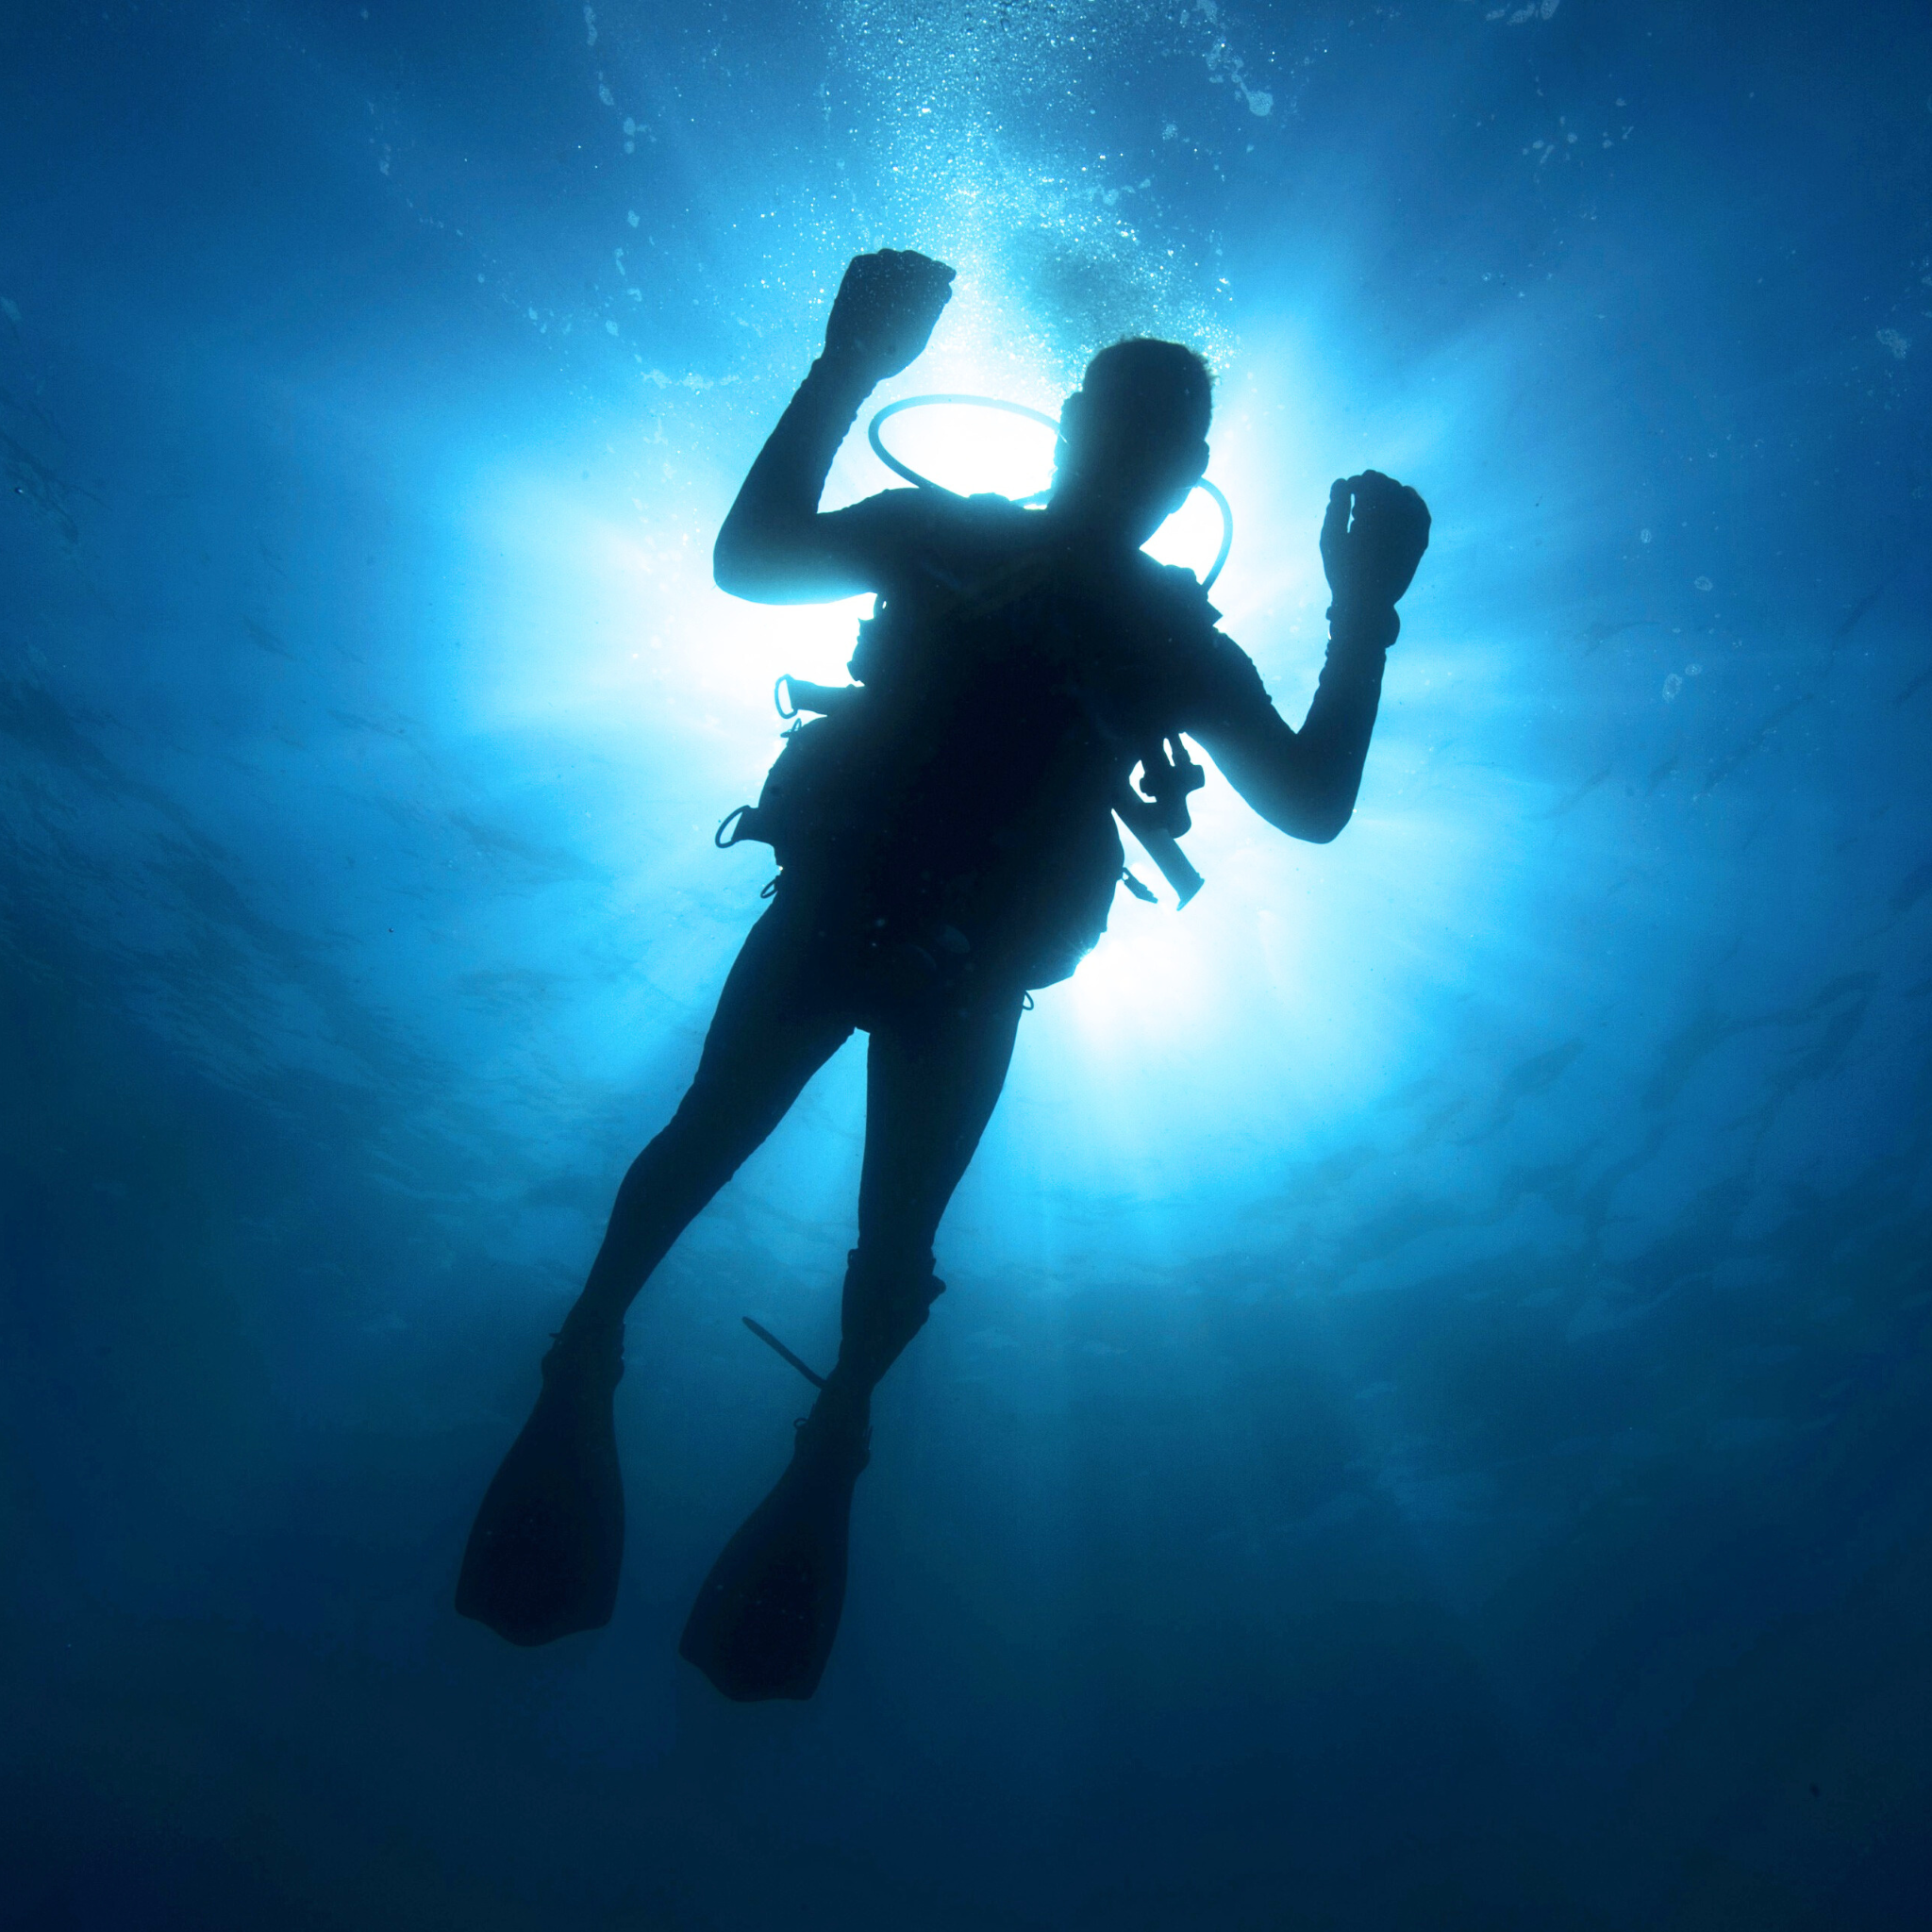 Scuba Diver in Ocean Facing Down With Sun Glaring Behind